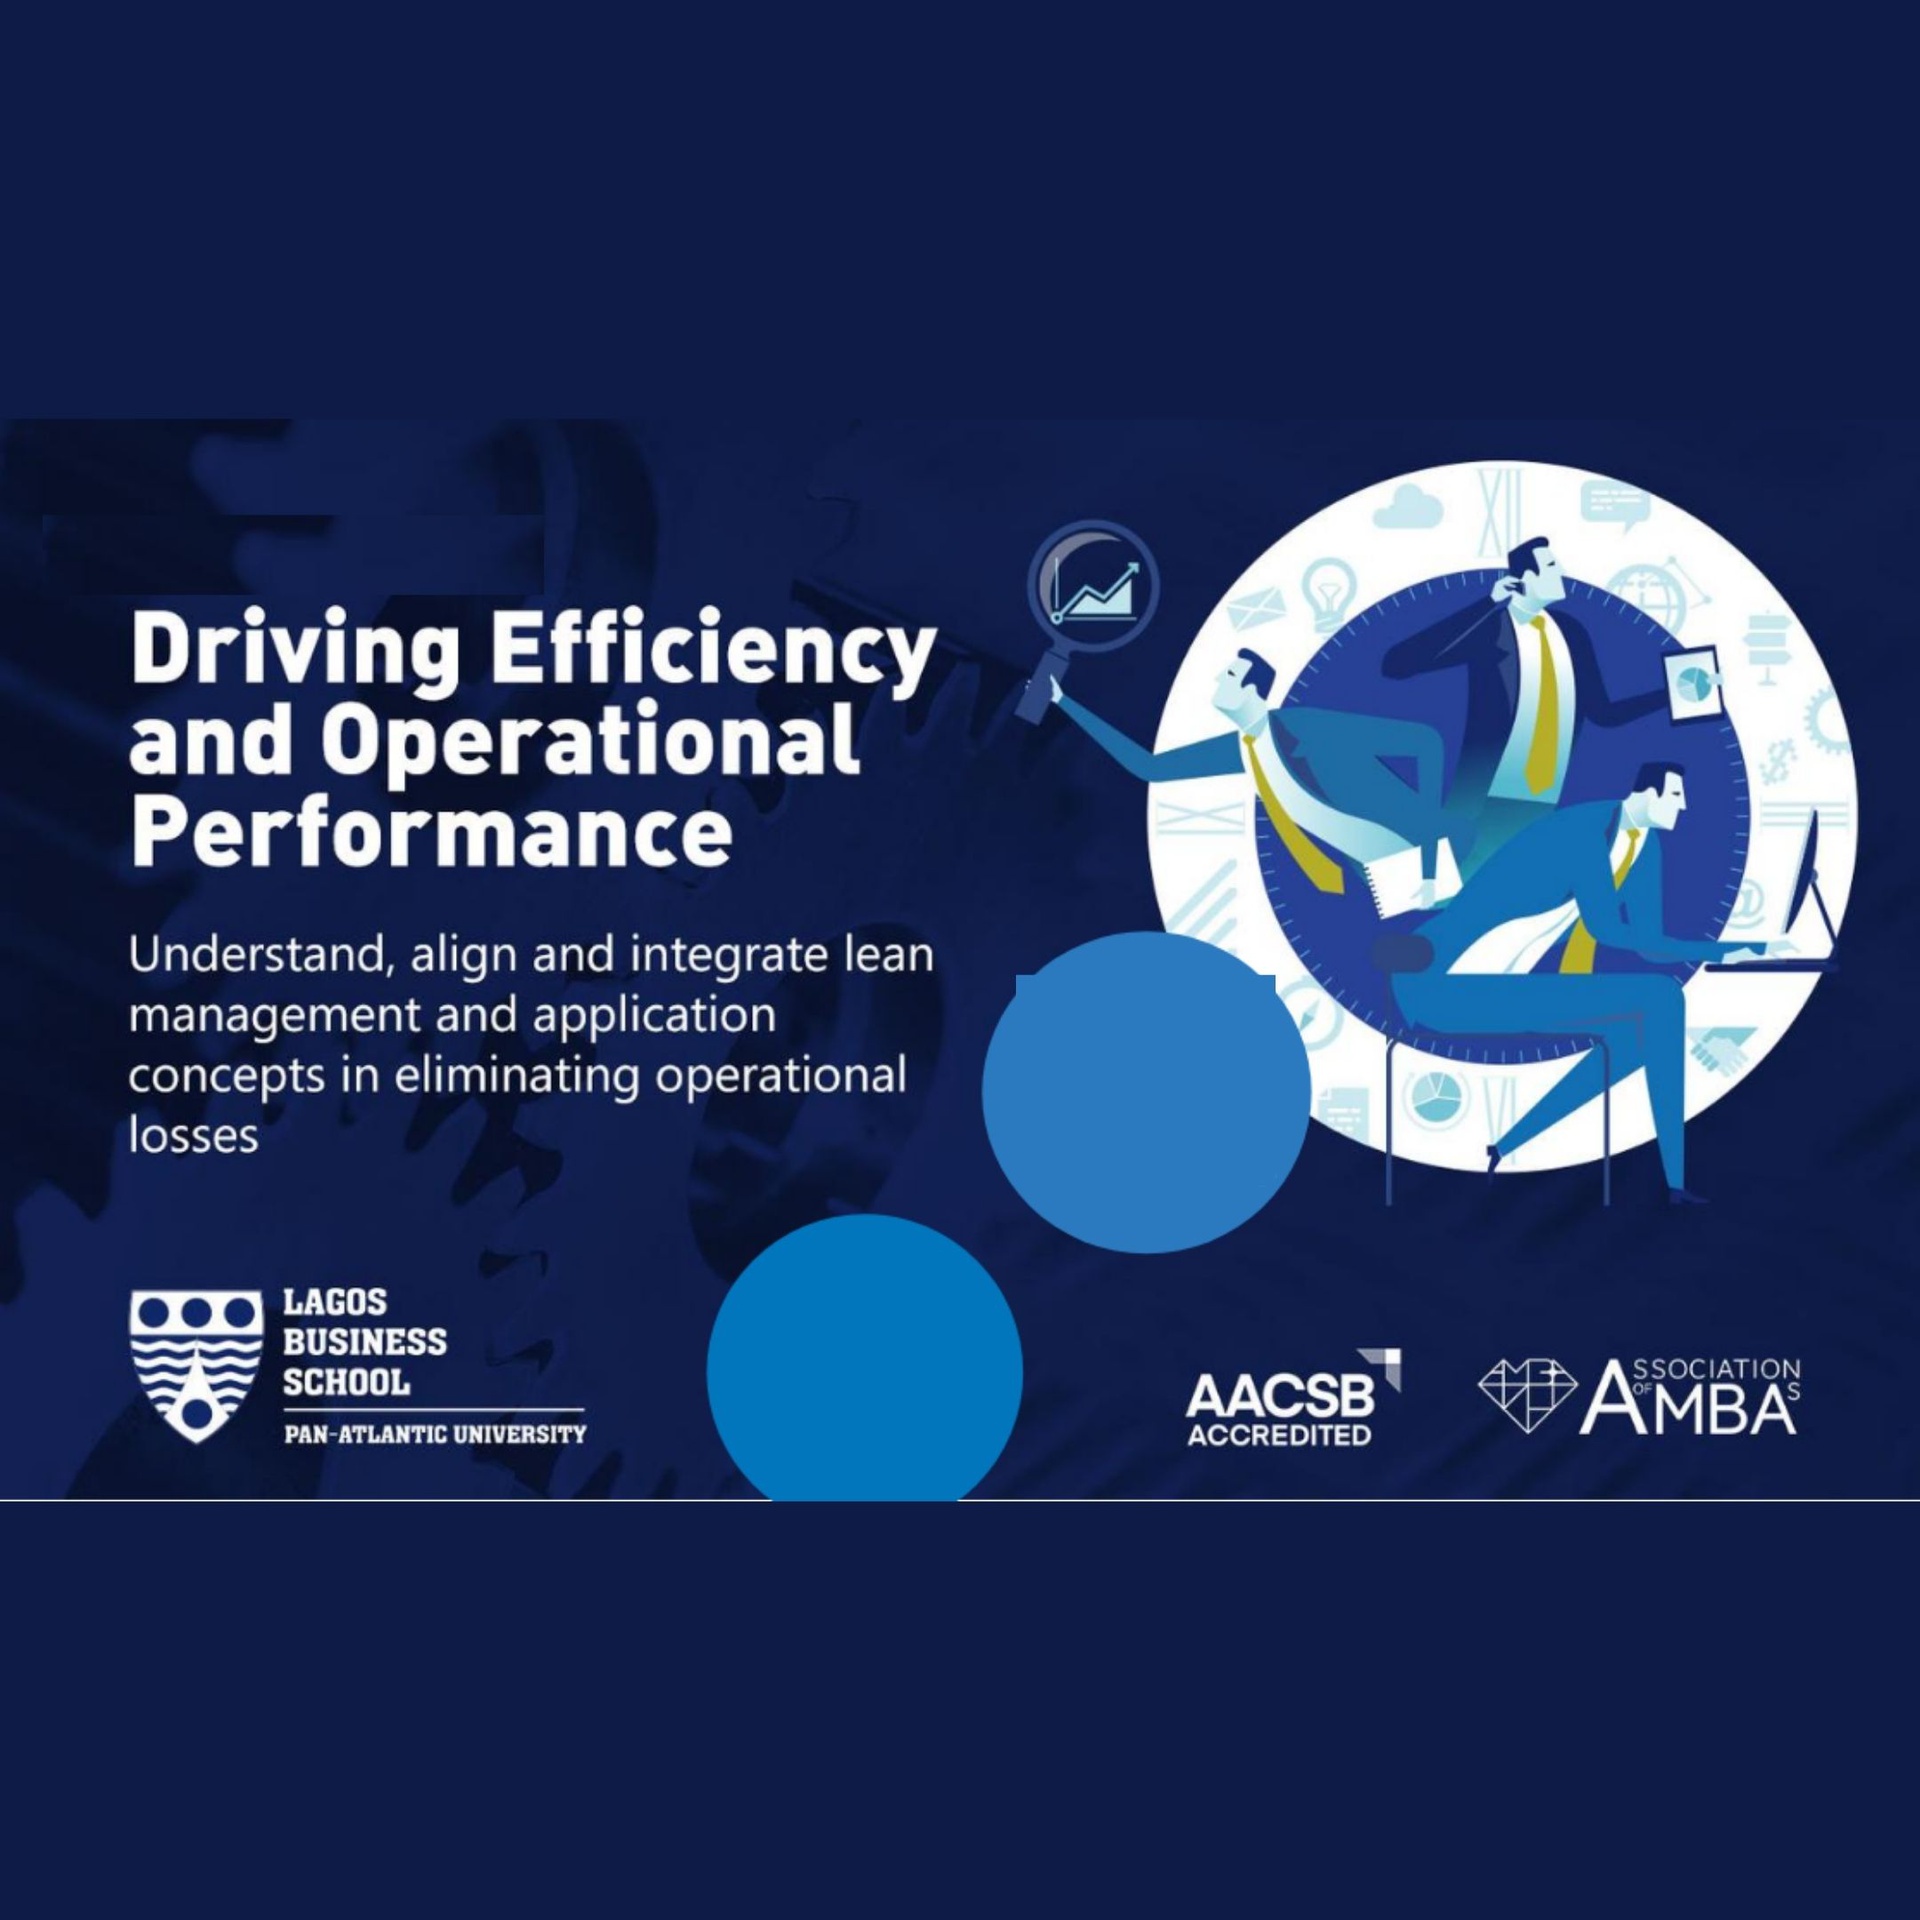 Driving Efficiency and Operational Performance